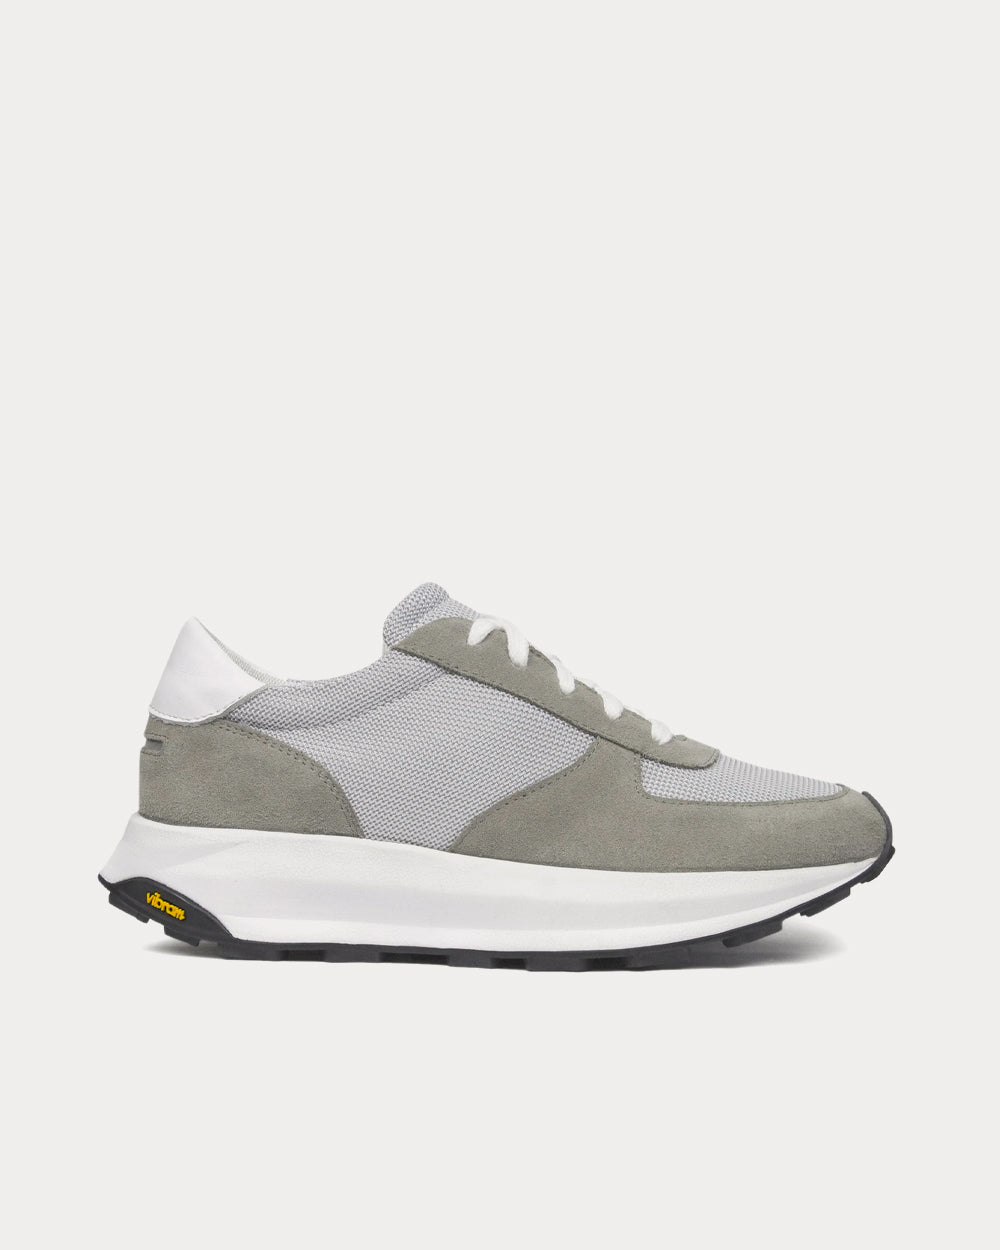 Unseen Footwear - Trinity Tech Suede, Leather & Mesh Grey / White Low Top Sneakers